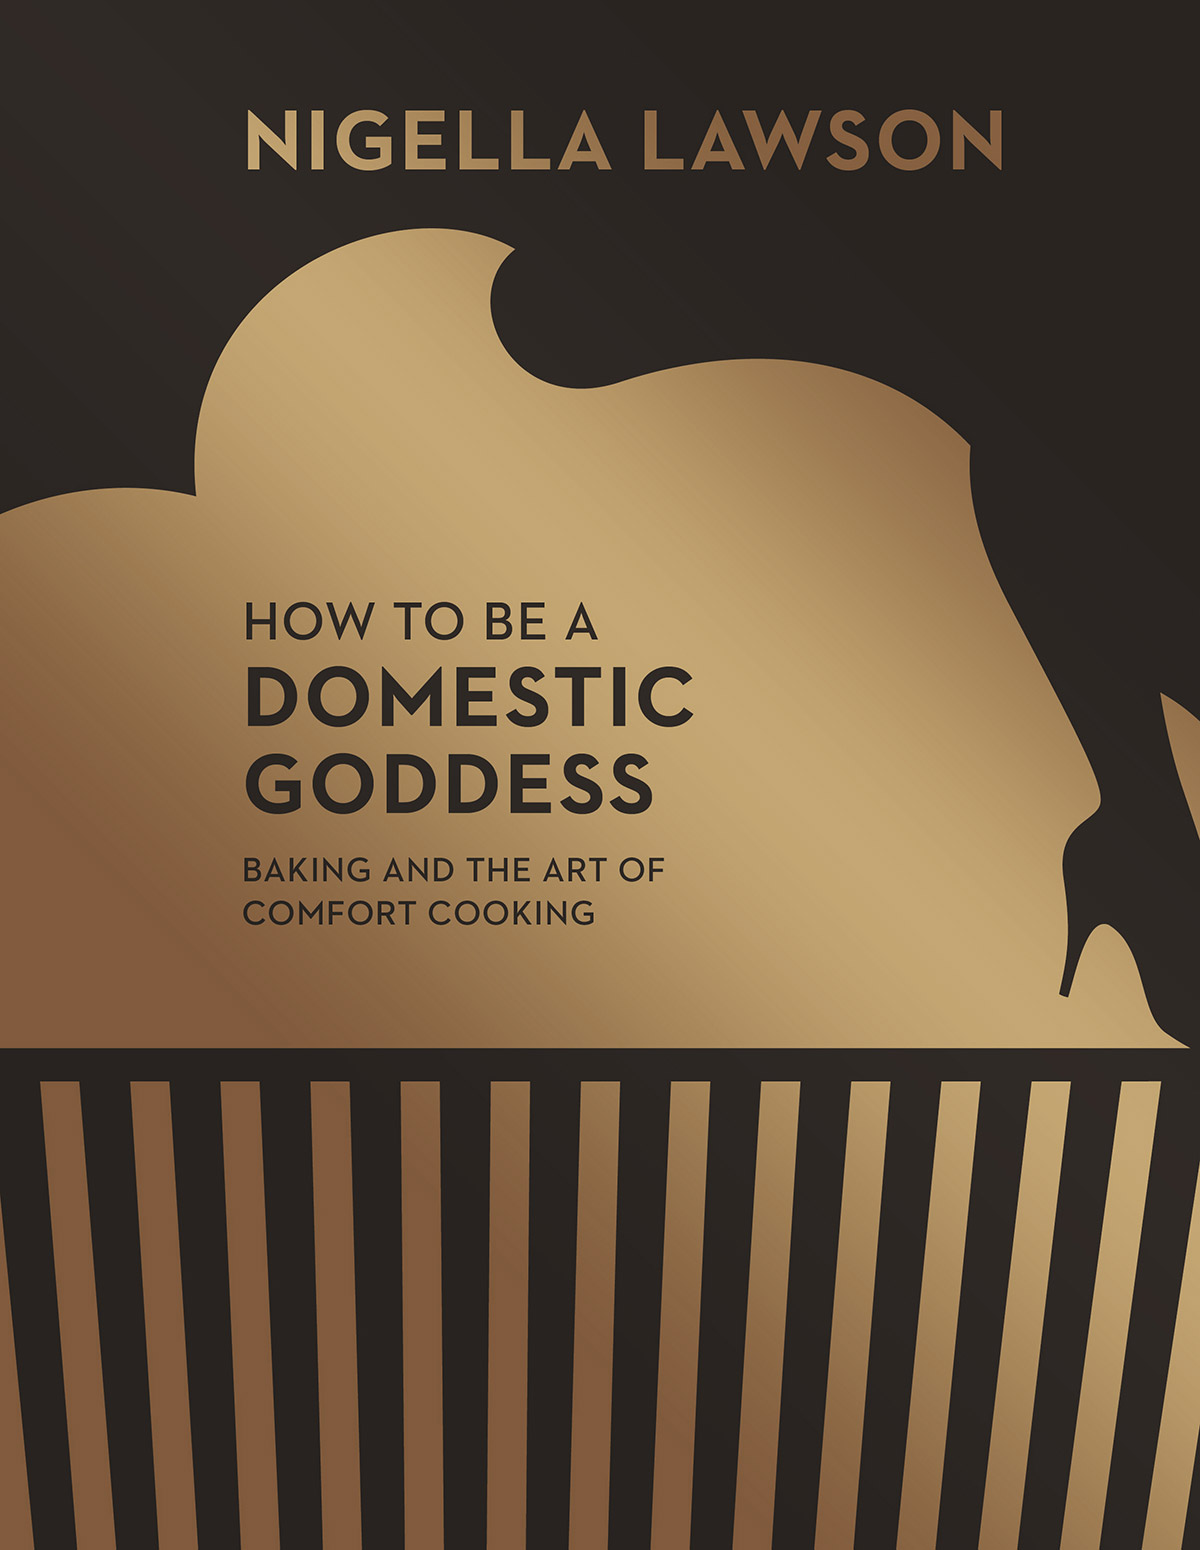 HOW TO BE A DOMESTIC GODDESS UK book cover